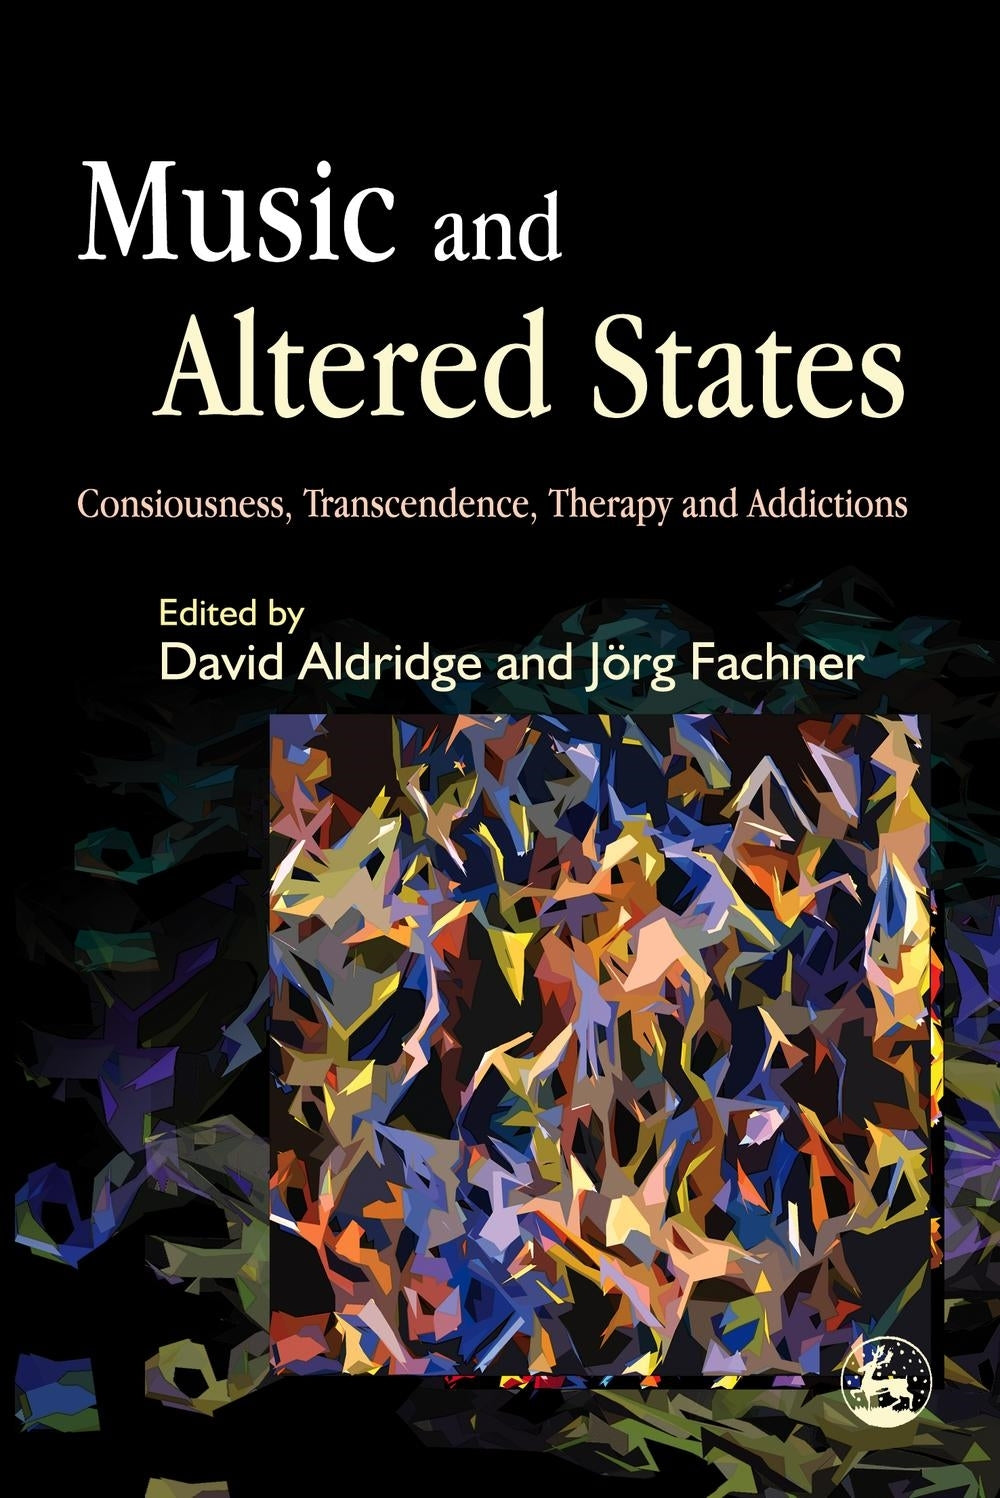 Music and Altered States by Joerg Fachner, David Aldridge, No Author Listed